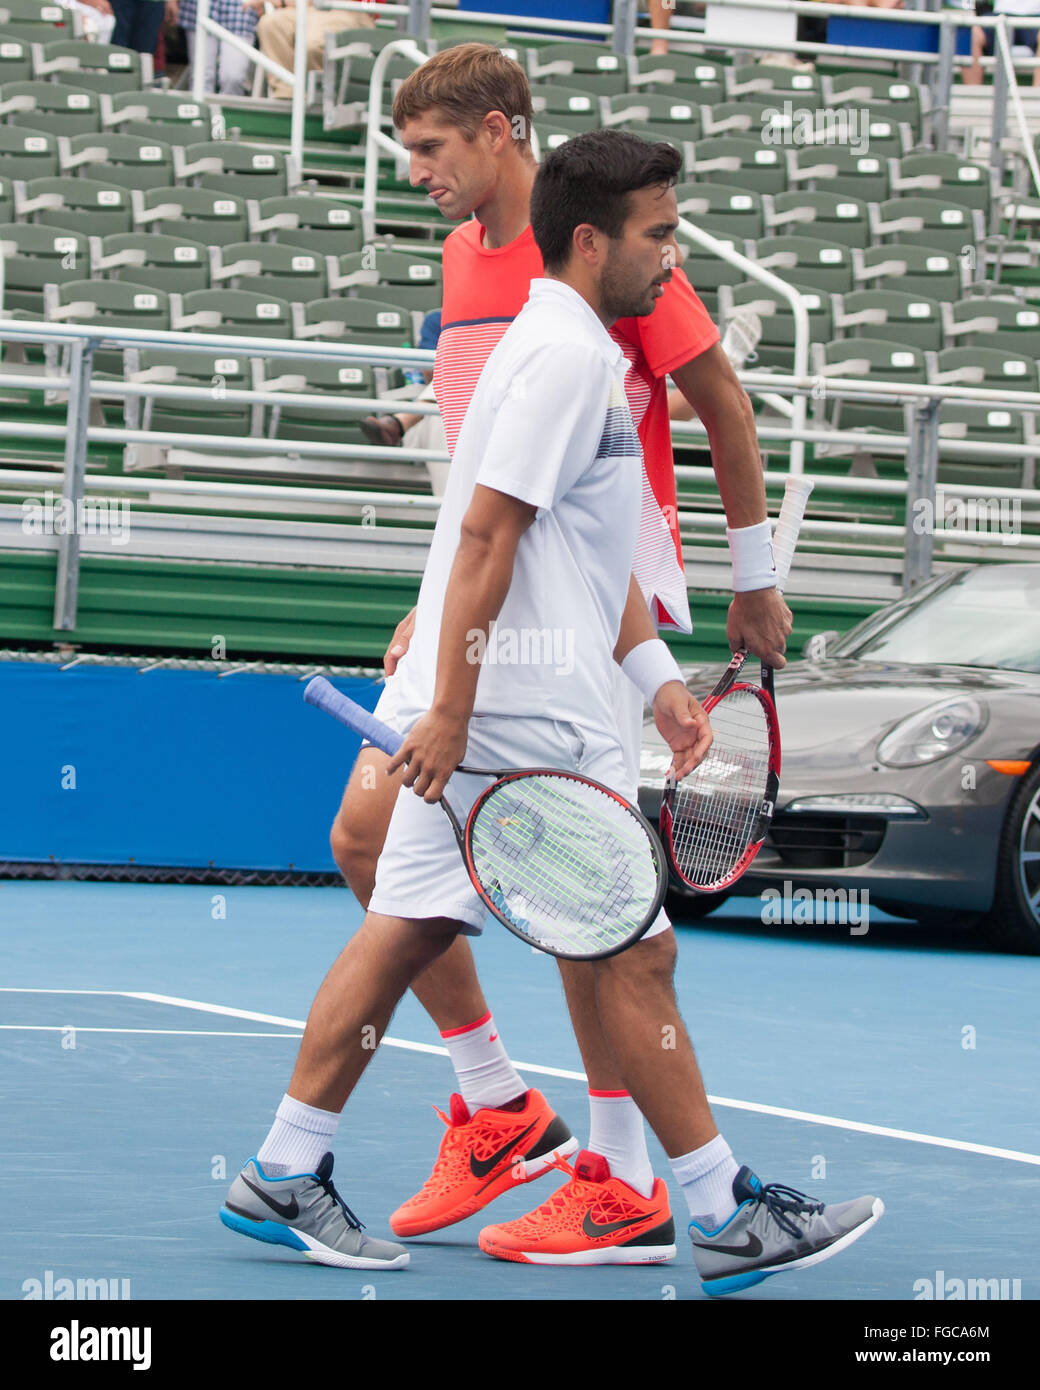 Delray Beach, Florida, US. 18th Feb, 2016. The Filipino-Belarusian third seed duo TREAT HUEY (foreground) and MAX MIRNYI (in rear) are through to the ATP World Tour Delray Beach Open semi-finals after a 6-3, 6-4 triumph over Australians Chris Guccione and Bernard Tomic. Credit:  Arnold Drapkin/ZUMA Wire/Alamy Live News Stock Photo